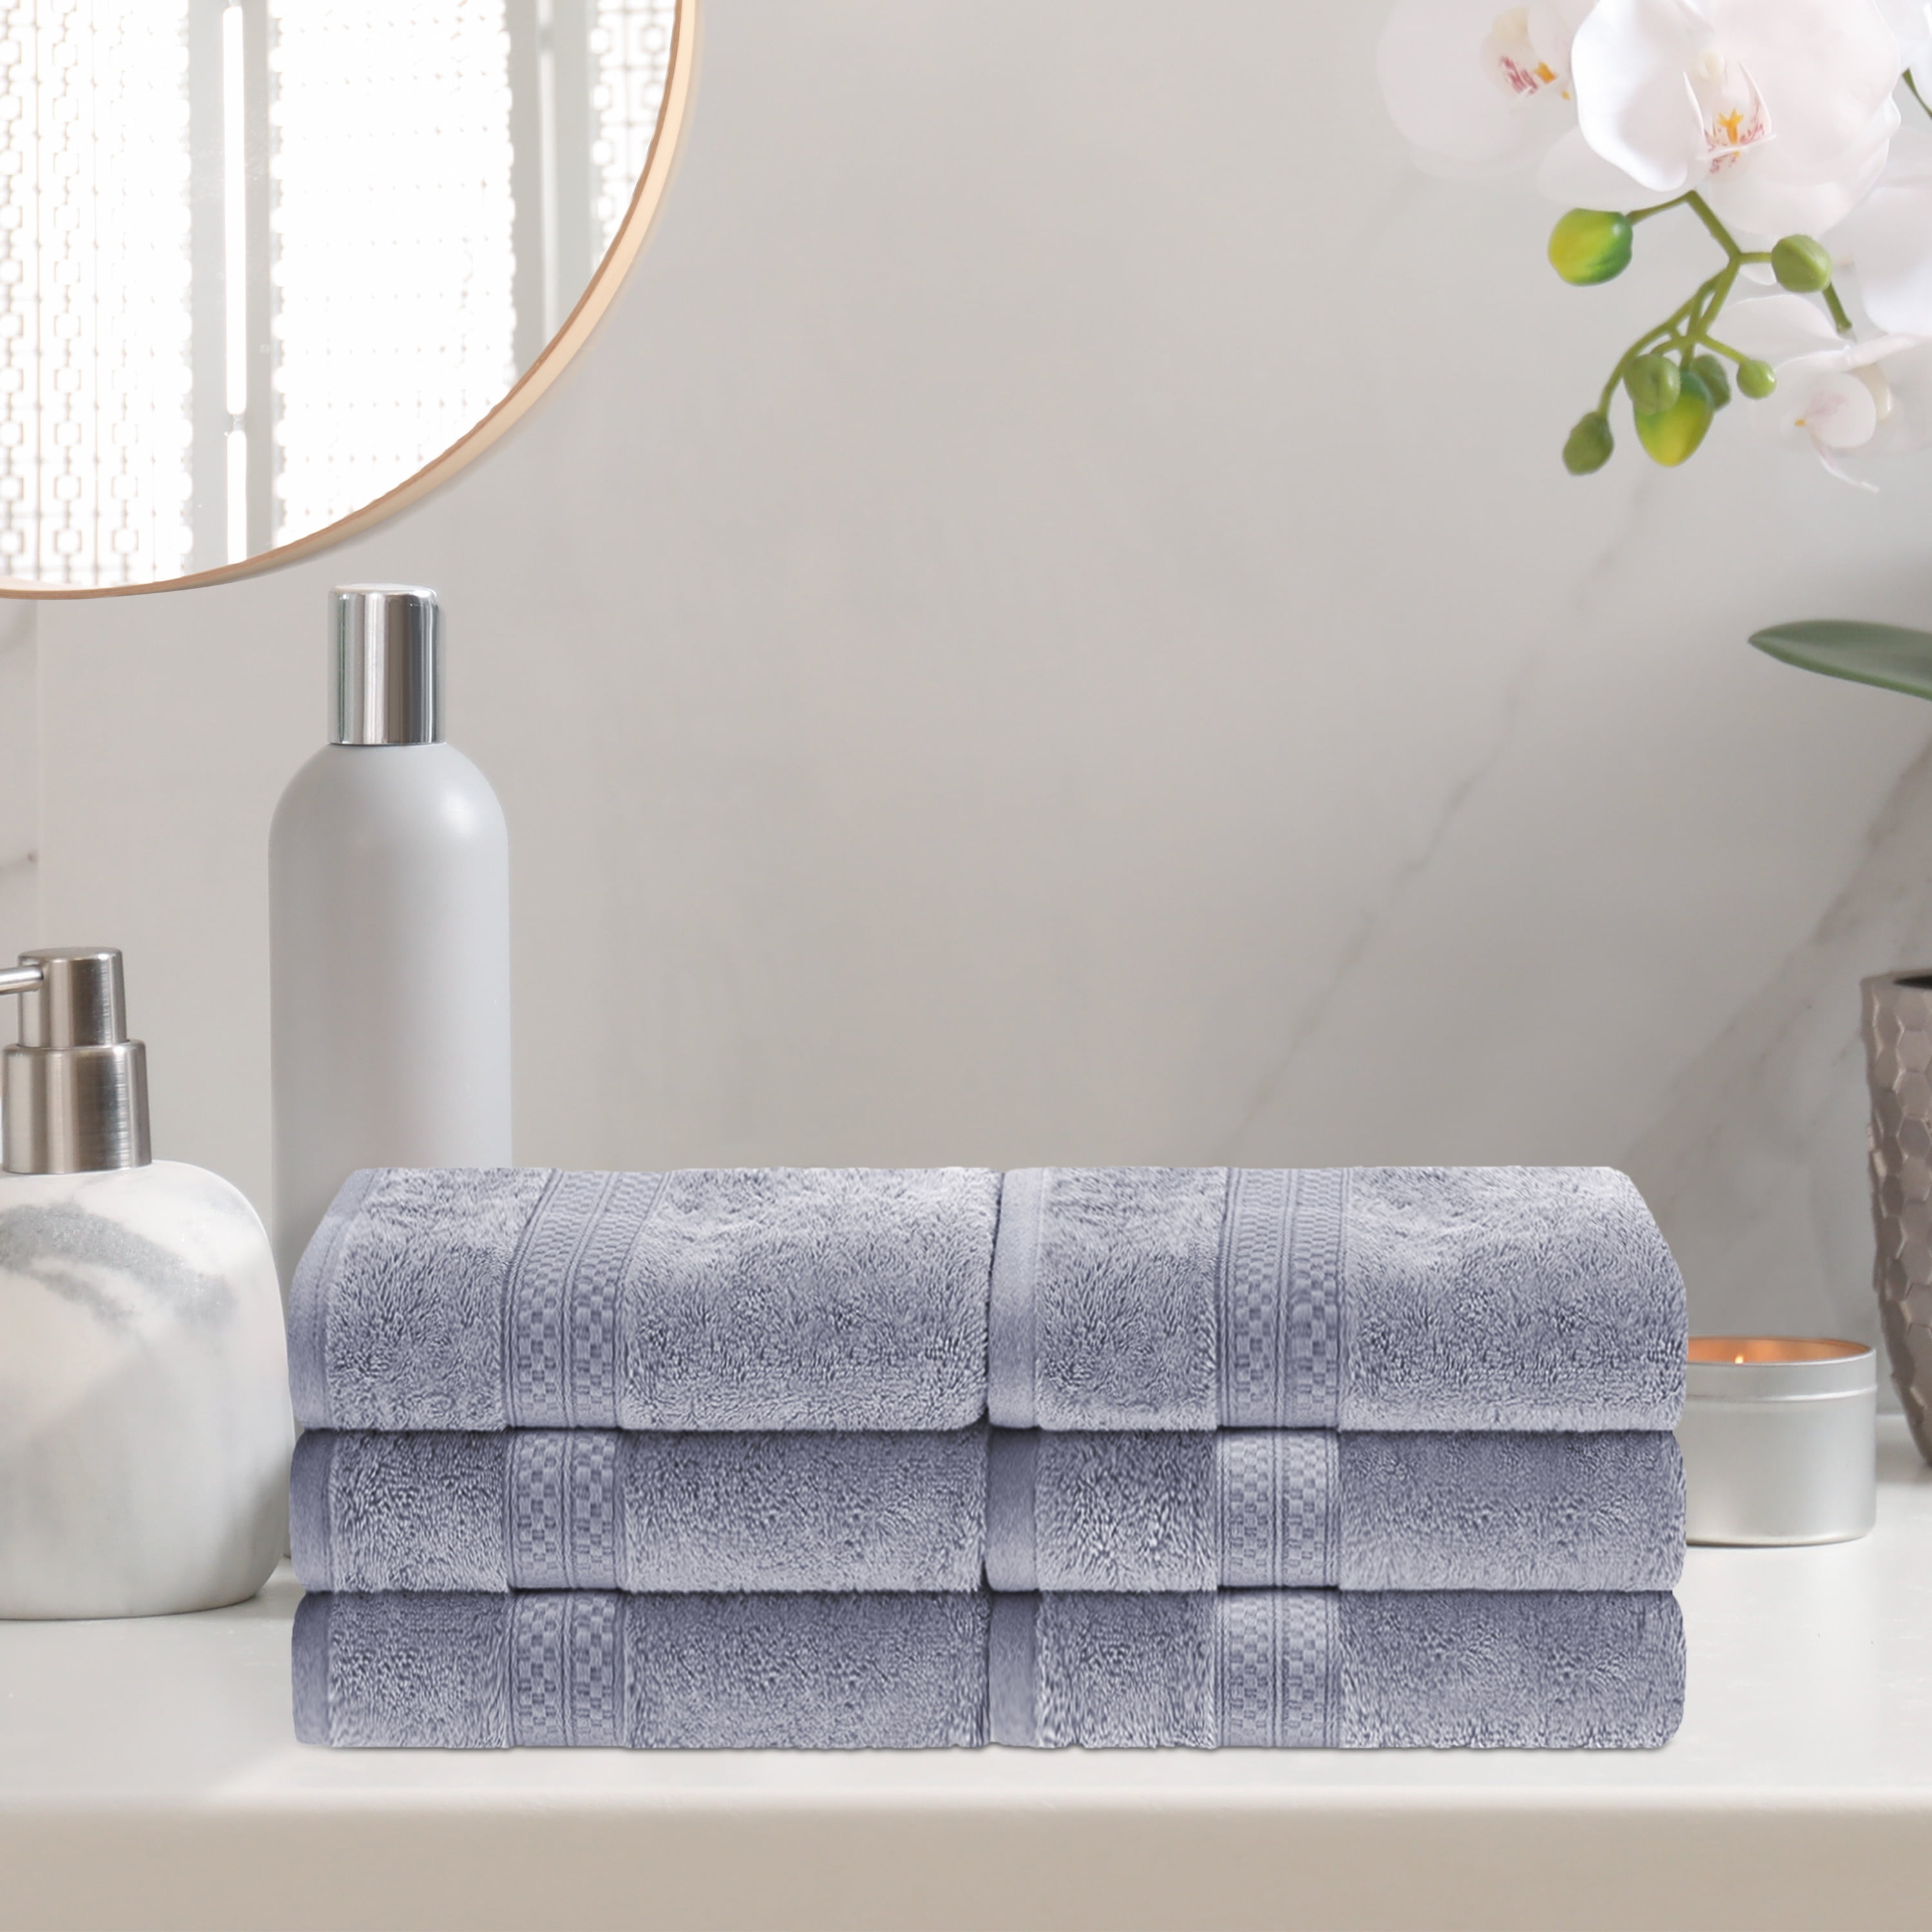 ecoexistence, Bath, Ecoexistence Made With Rayon From Bamboo Cotton Blend  Towel Set 6piece Soft